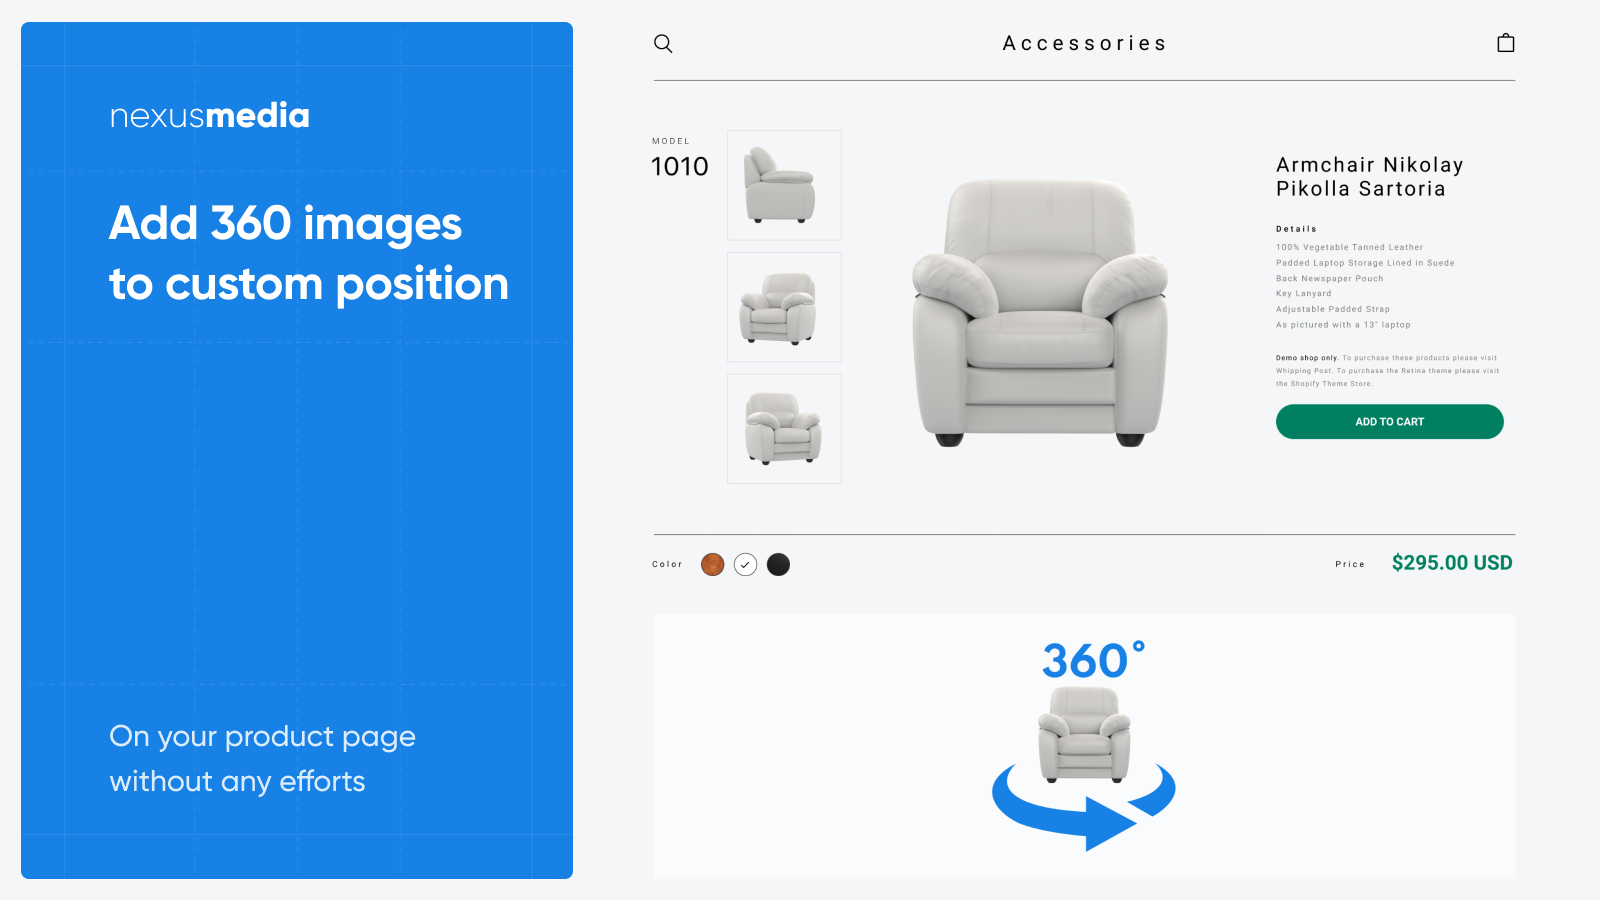 Add 360 images to custom position on your product page